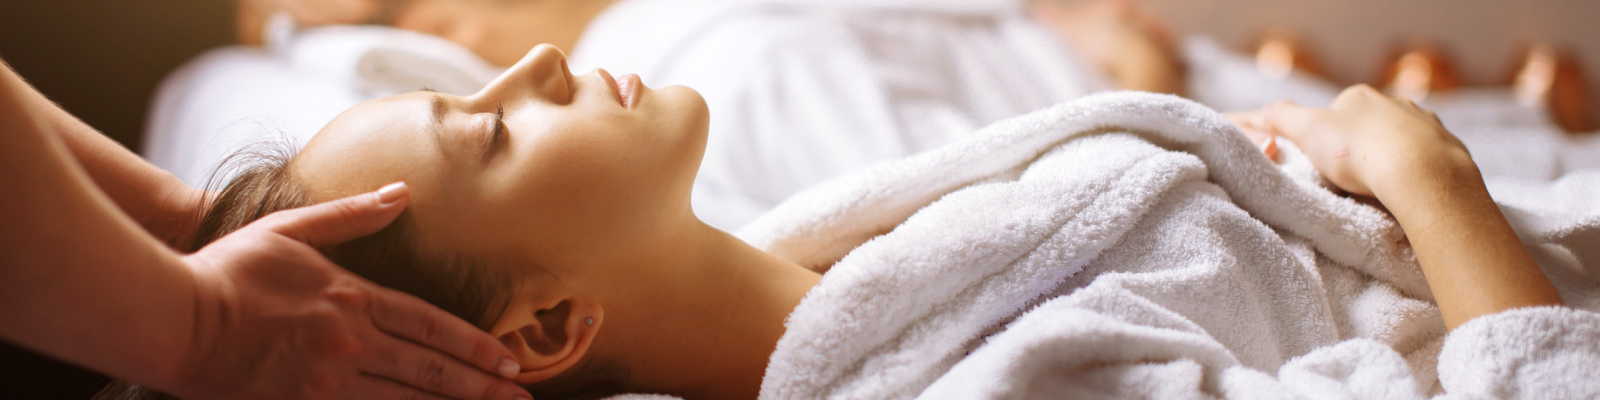 Skin Care & Facial Services - The Spa at Inn of the Mountain Gods